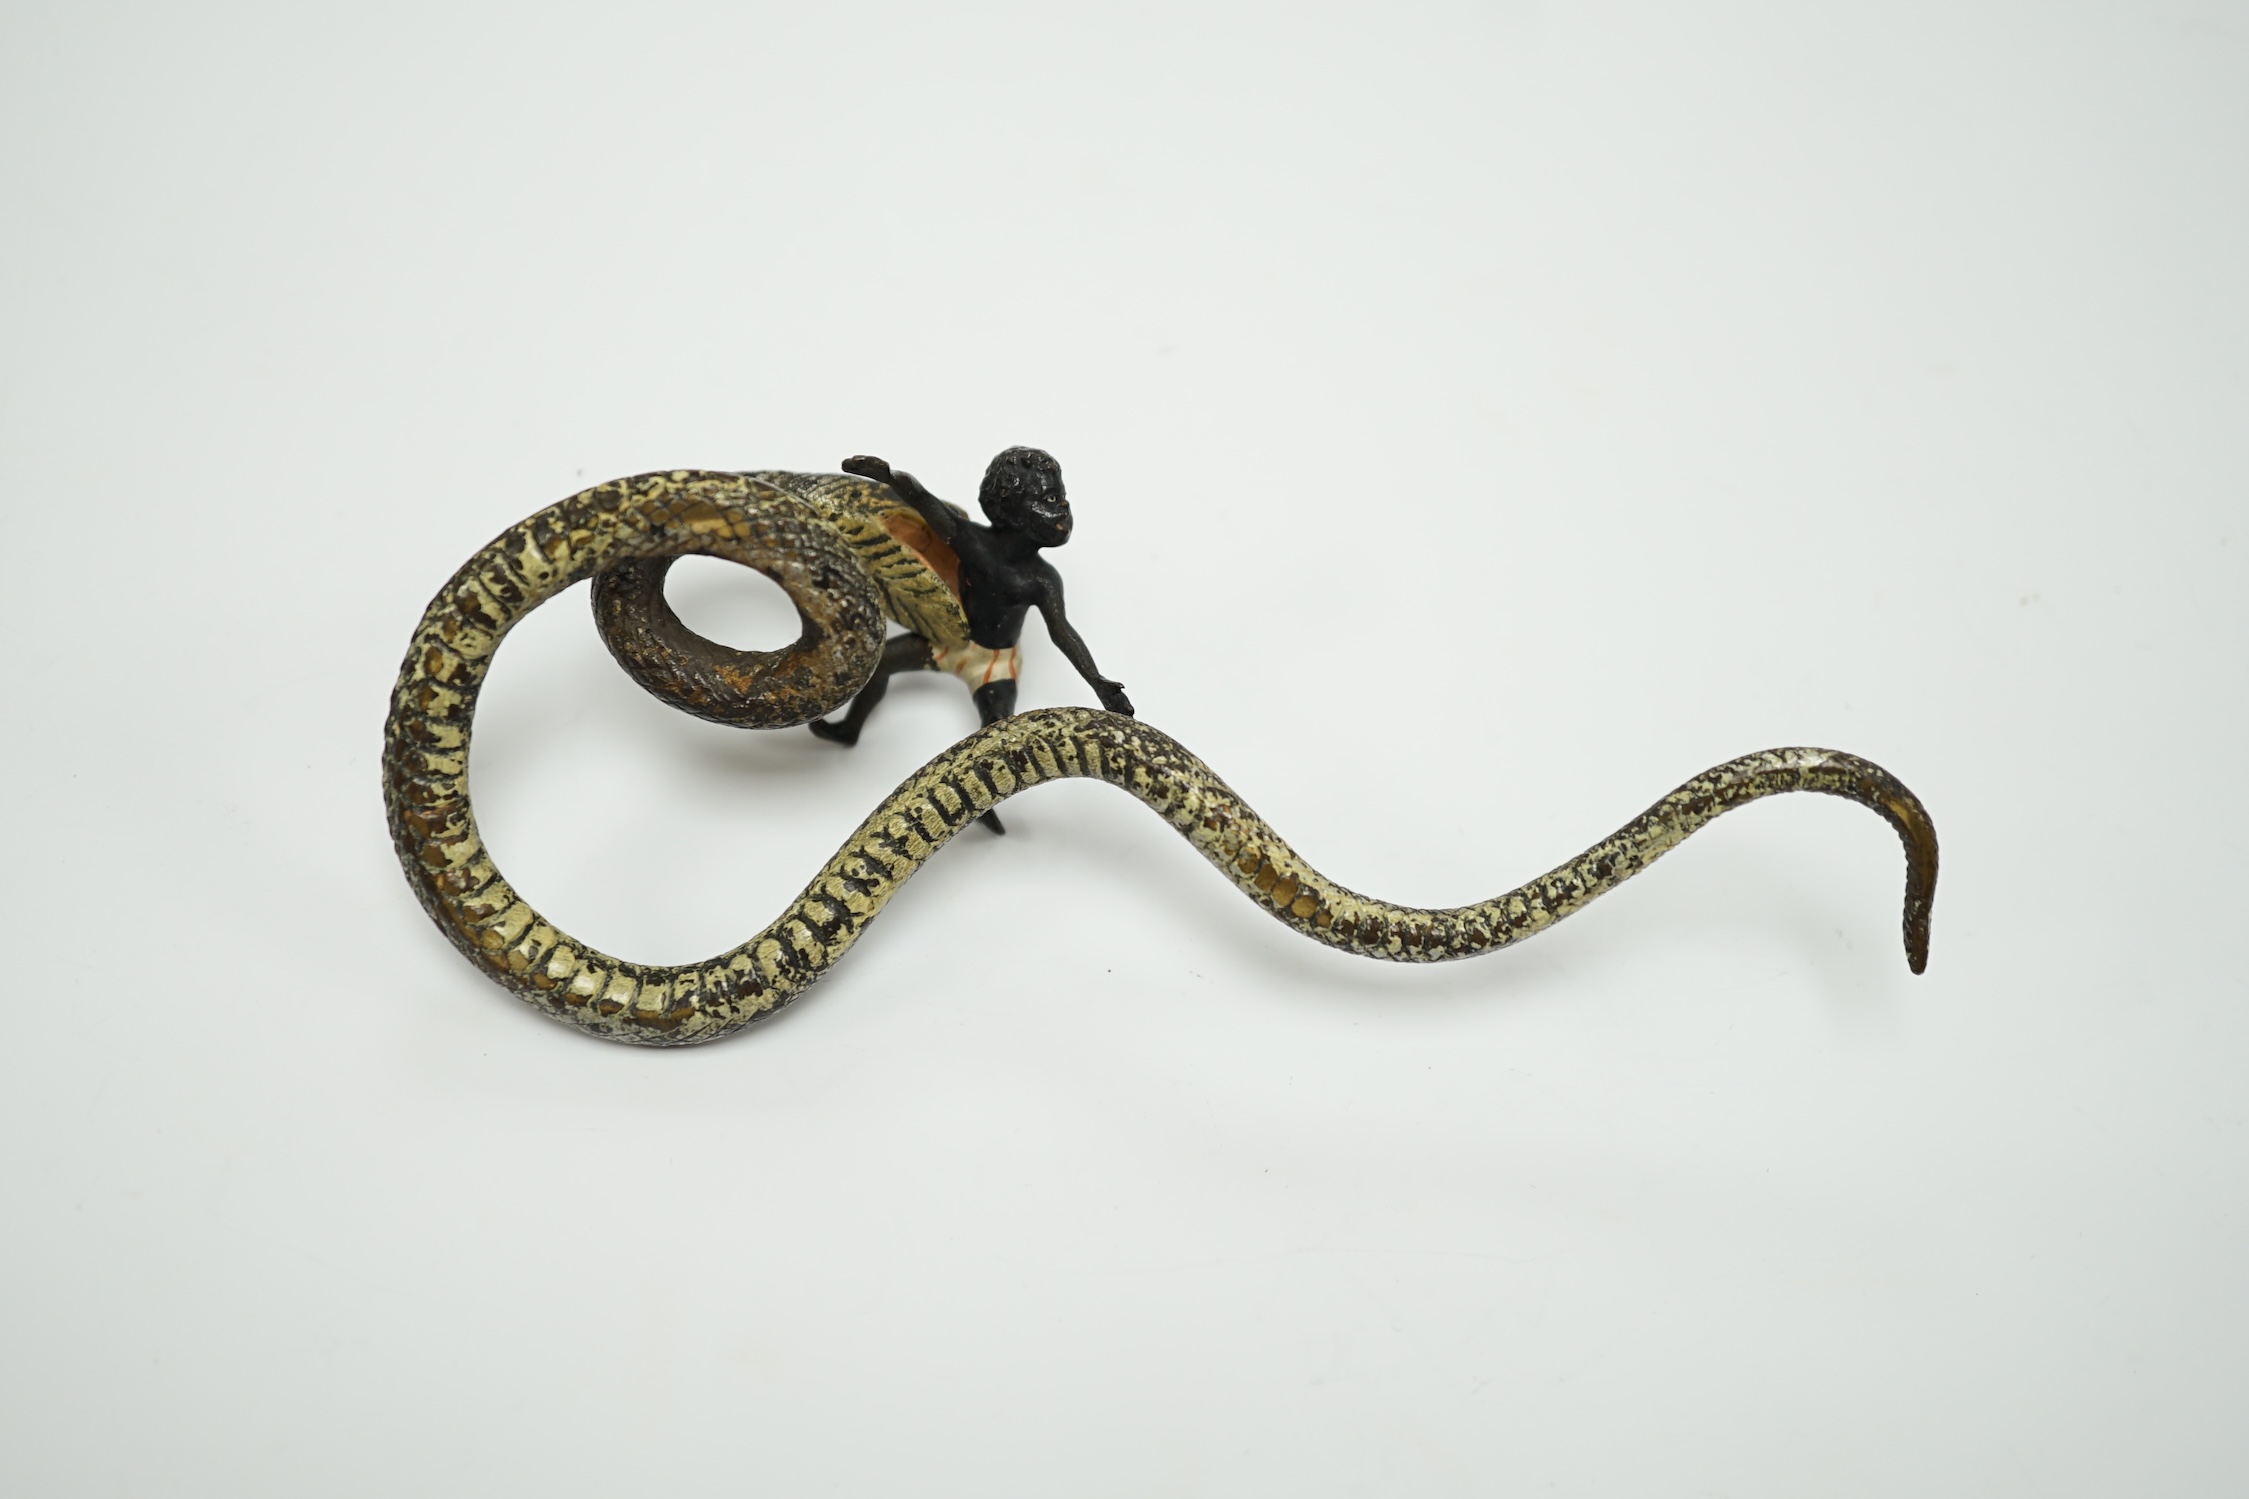 A Viennese cold painted bronze snake devouring a man, 14cm long